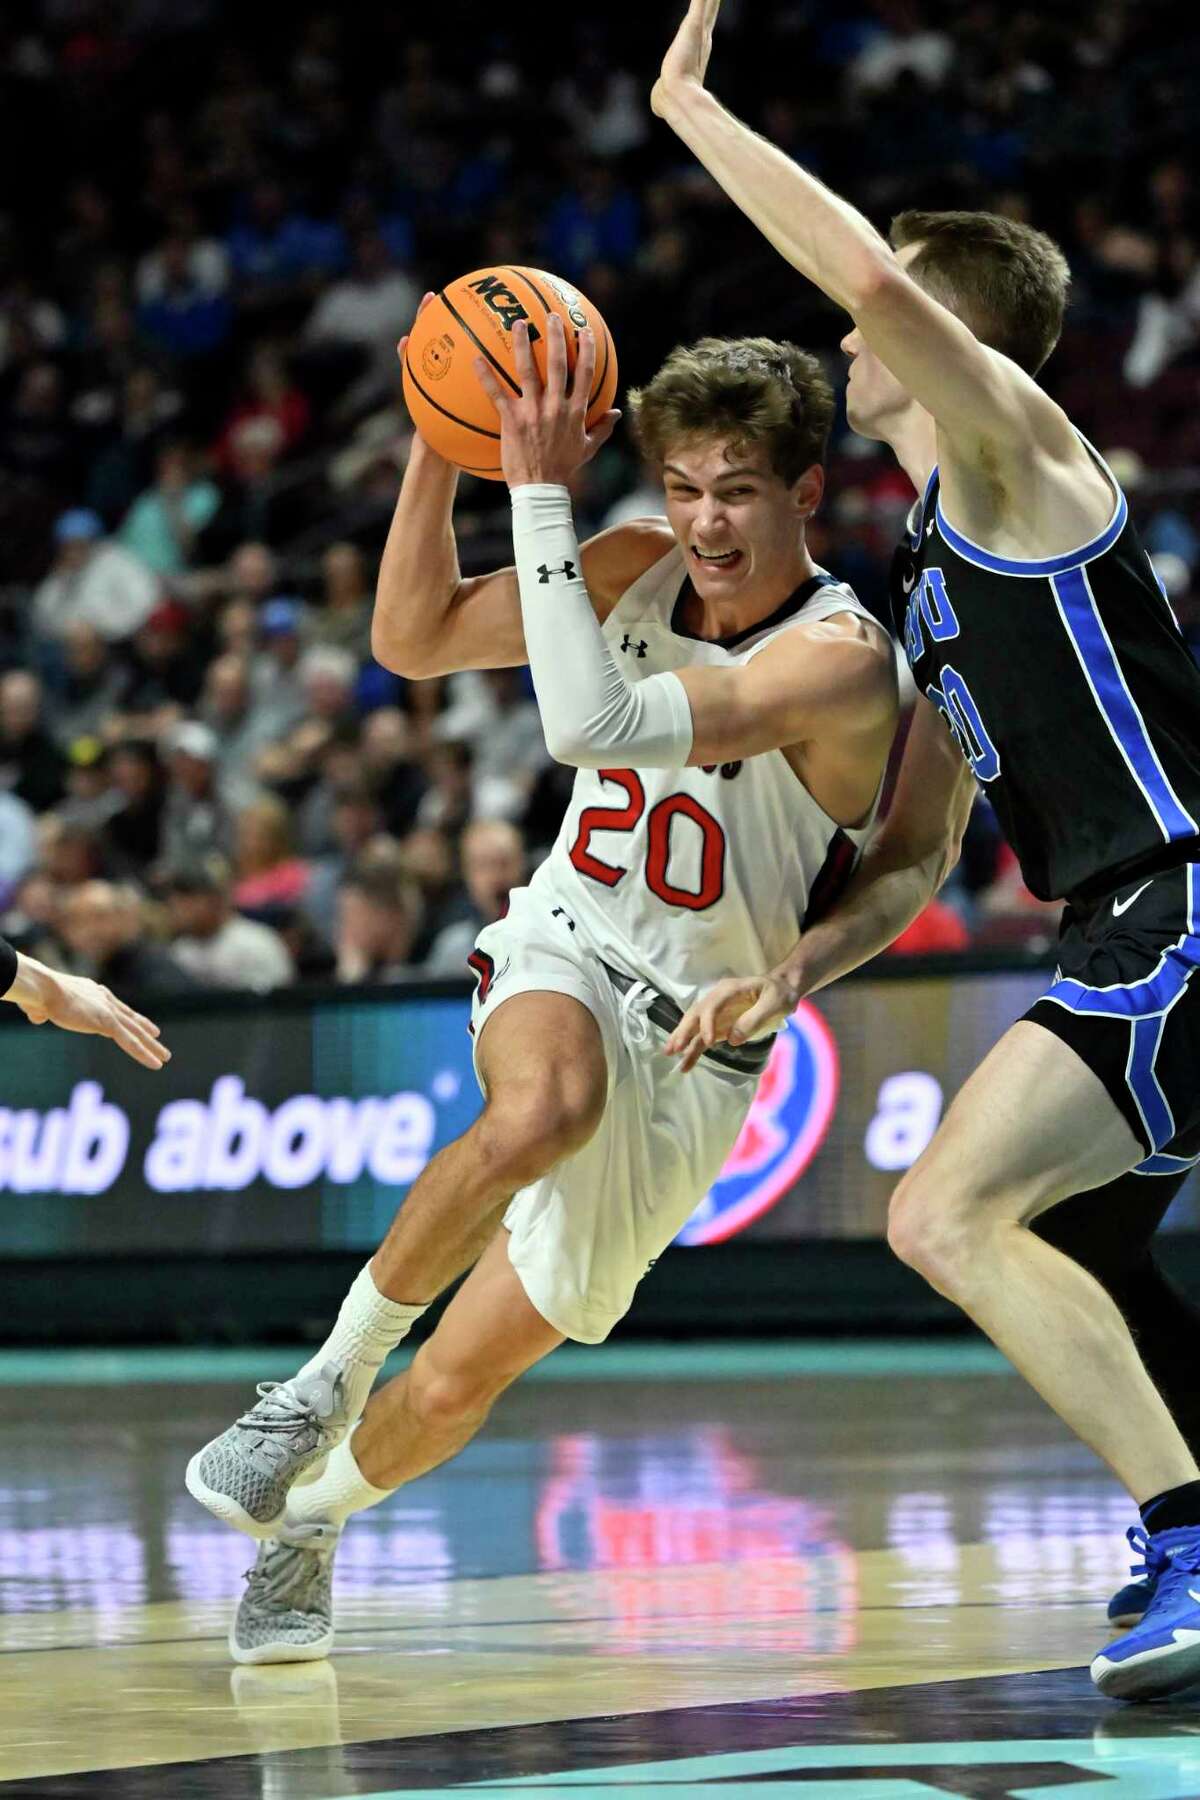 Saint Mary's guard Aidan Mahaney (20) drives the ball against BYU during the first half of an NCAA college basketball game in the semifinals of the West Coast Conference men's tournament Monday, March 6, 2023, in Las Vegas. (AP Photo/David Becker)